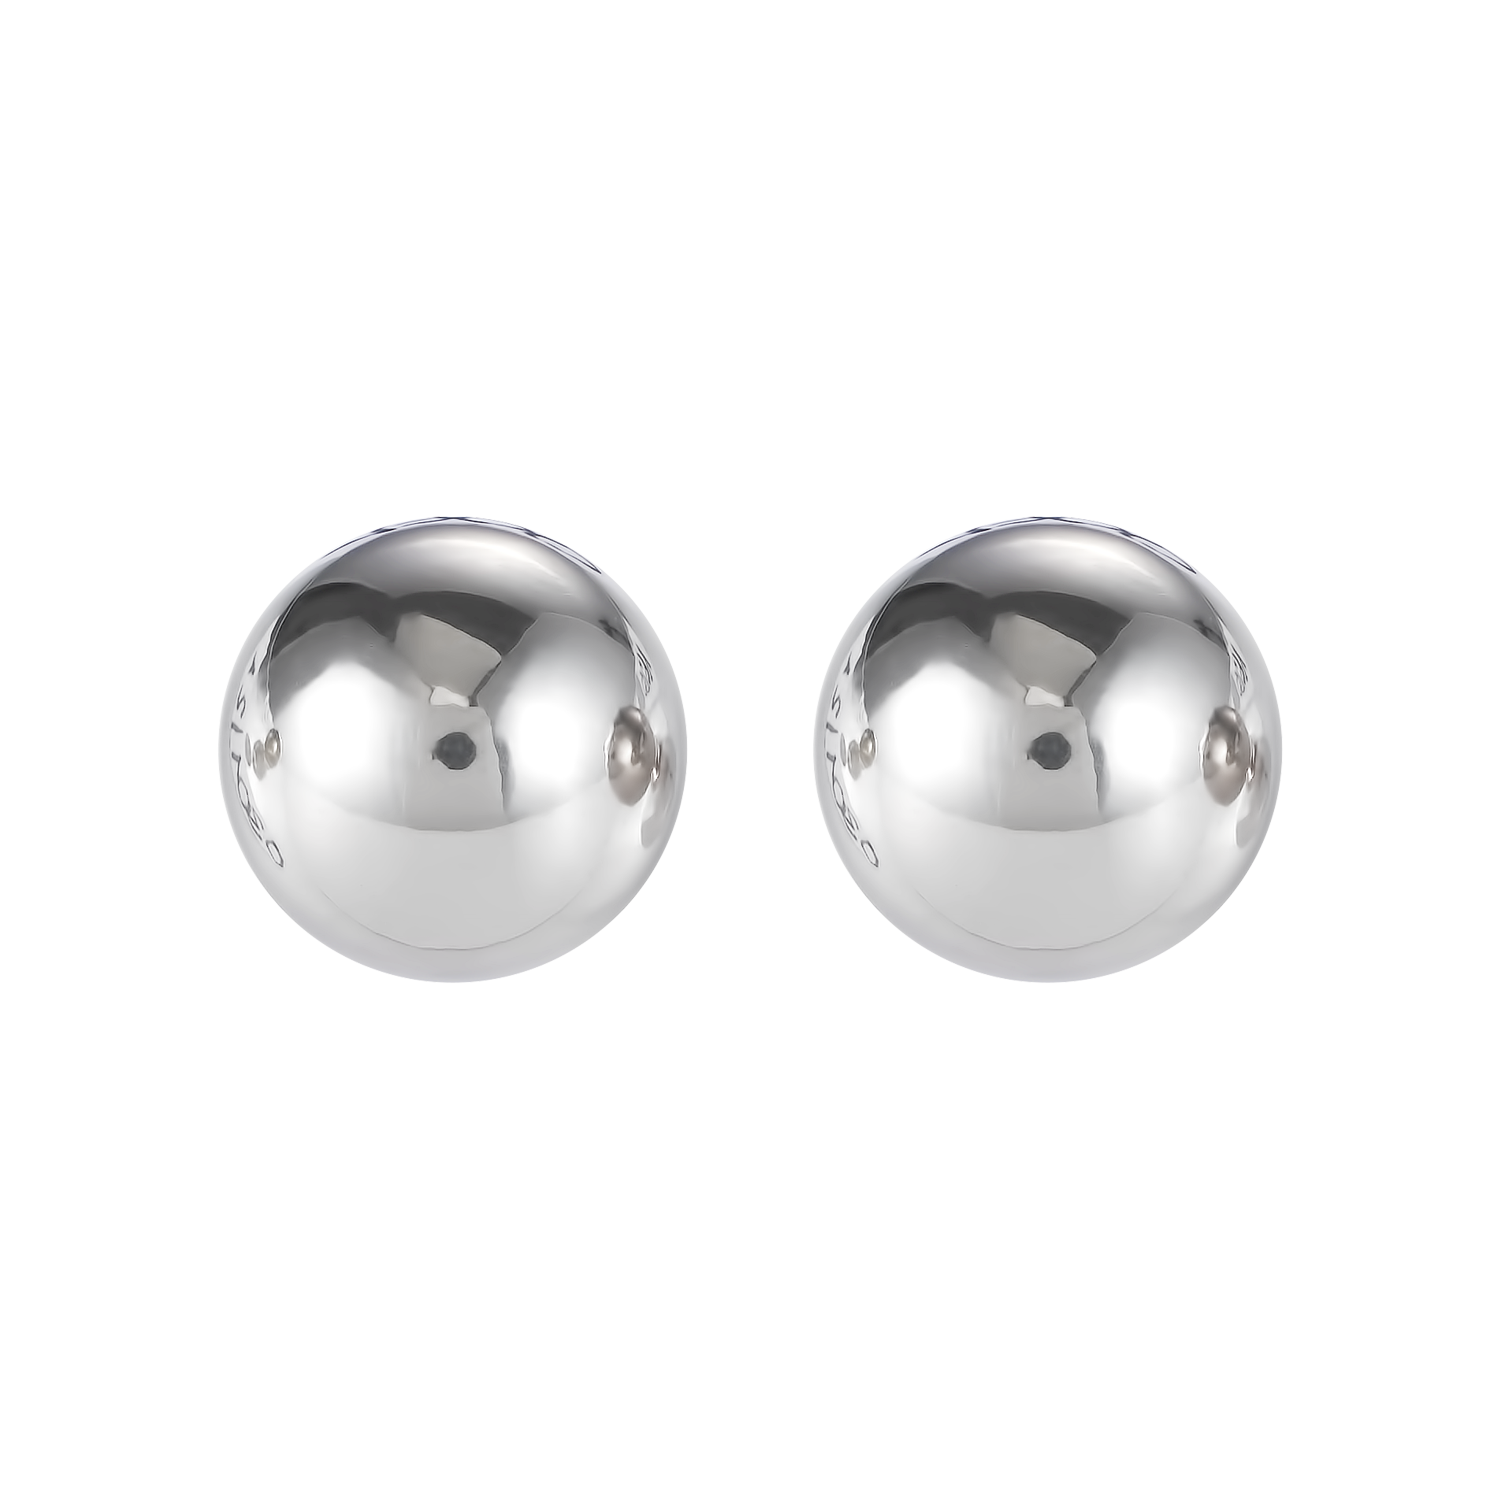 Earrings stainless steel ball large silver